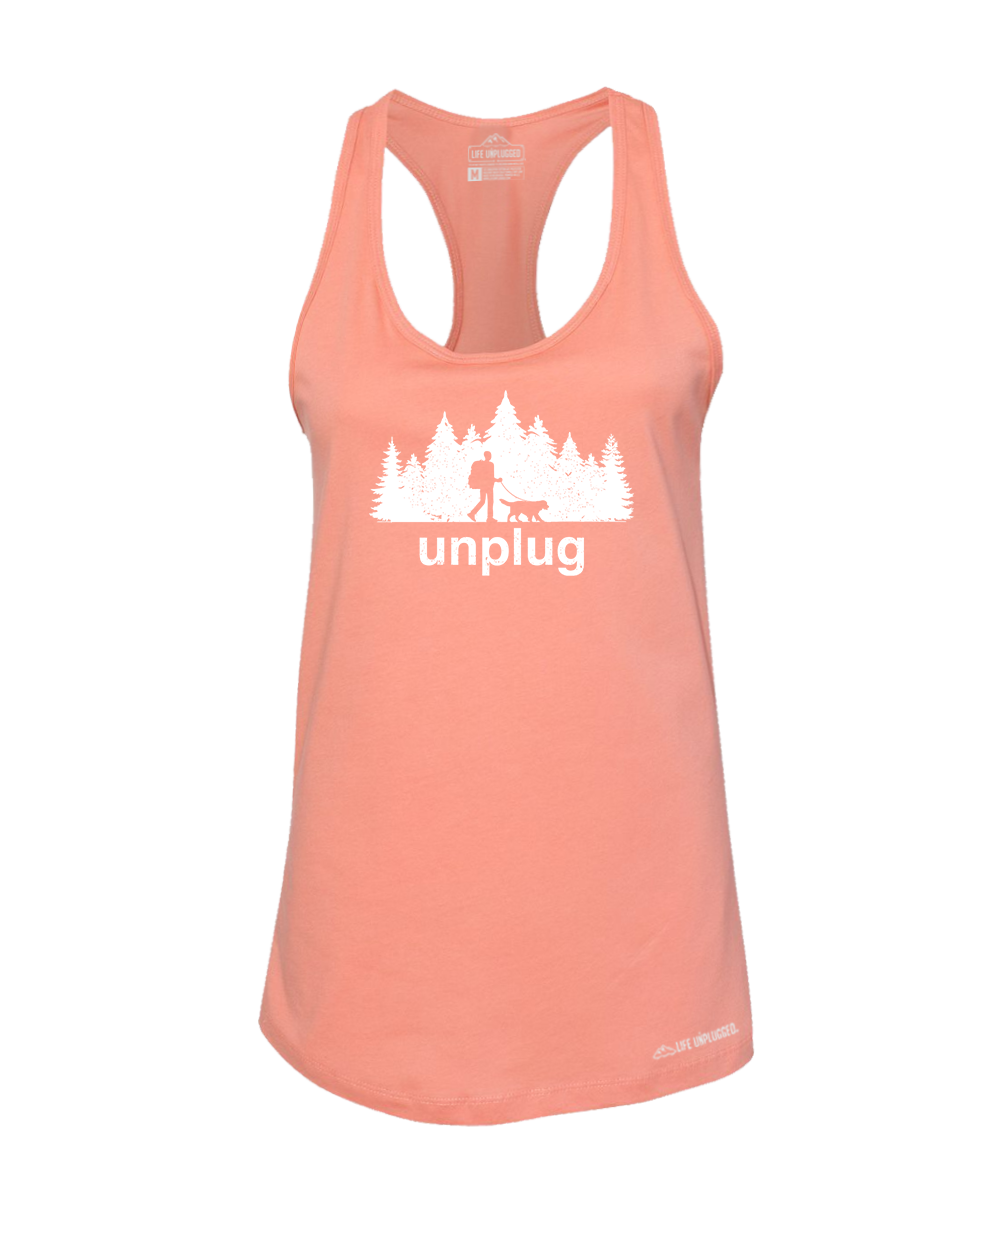 Dog Walks in the Woods Premium Women's Relaxed Fit Racerback Tank Top - Life Unplugged